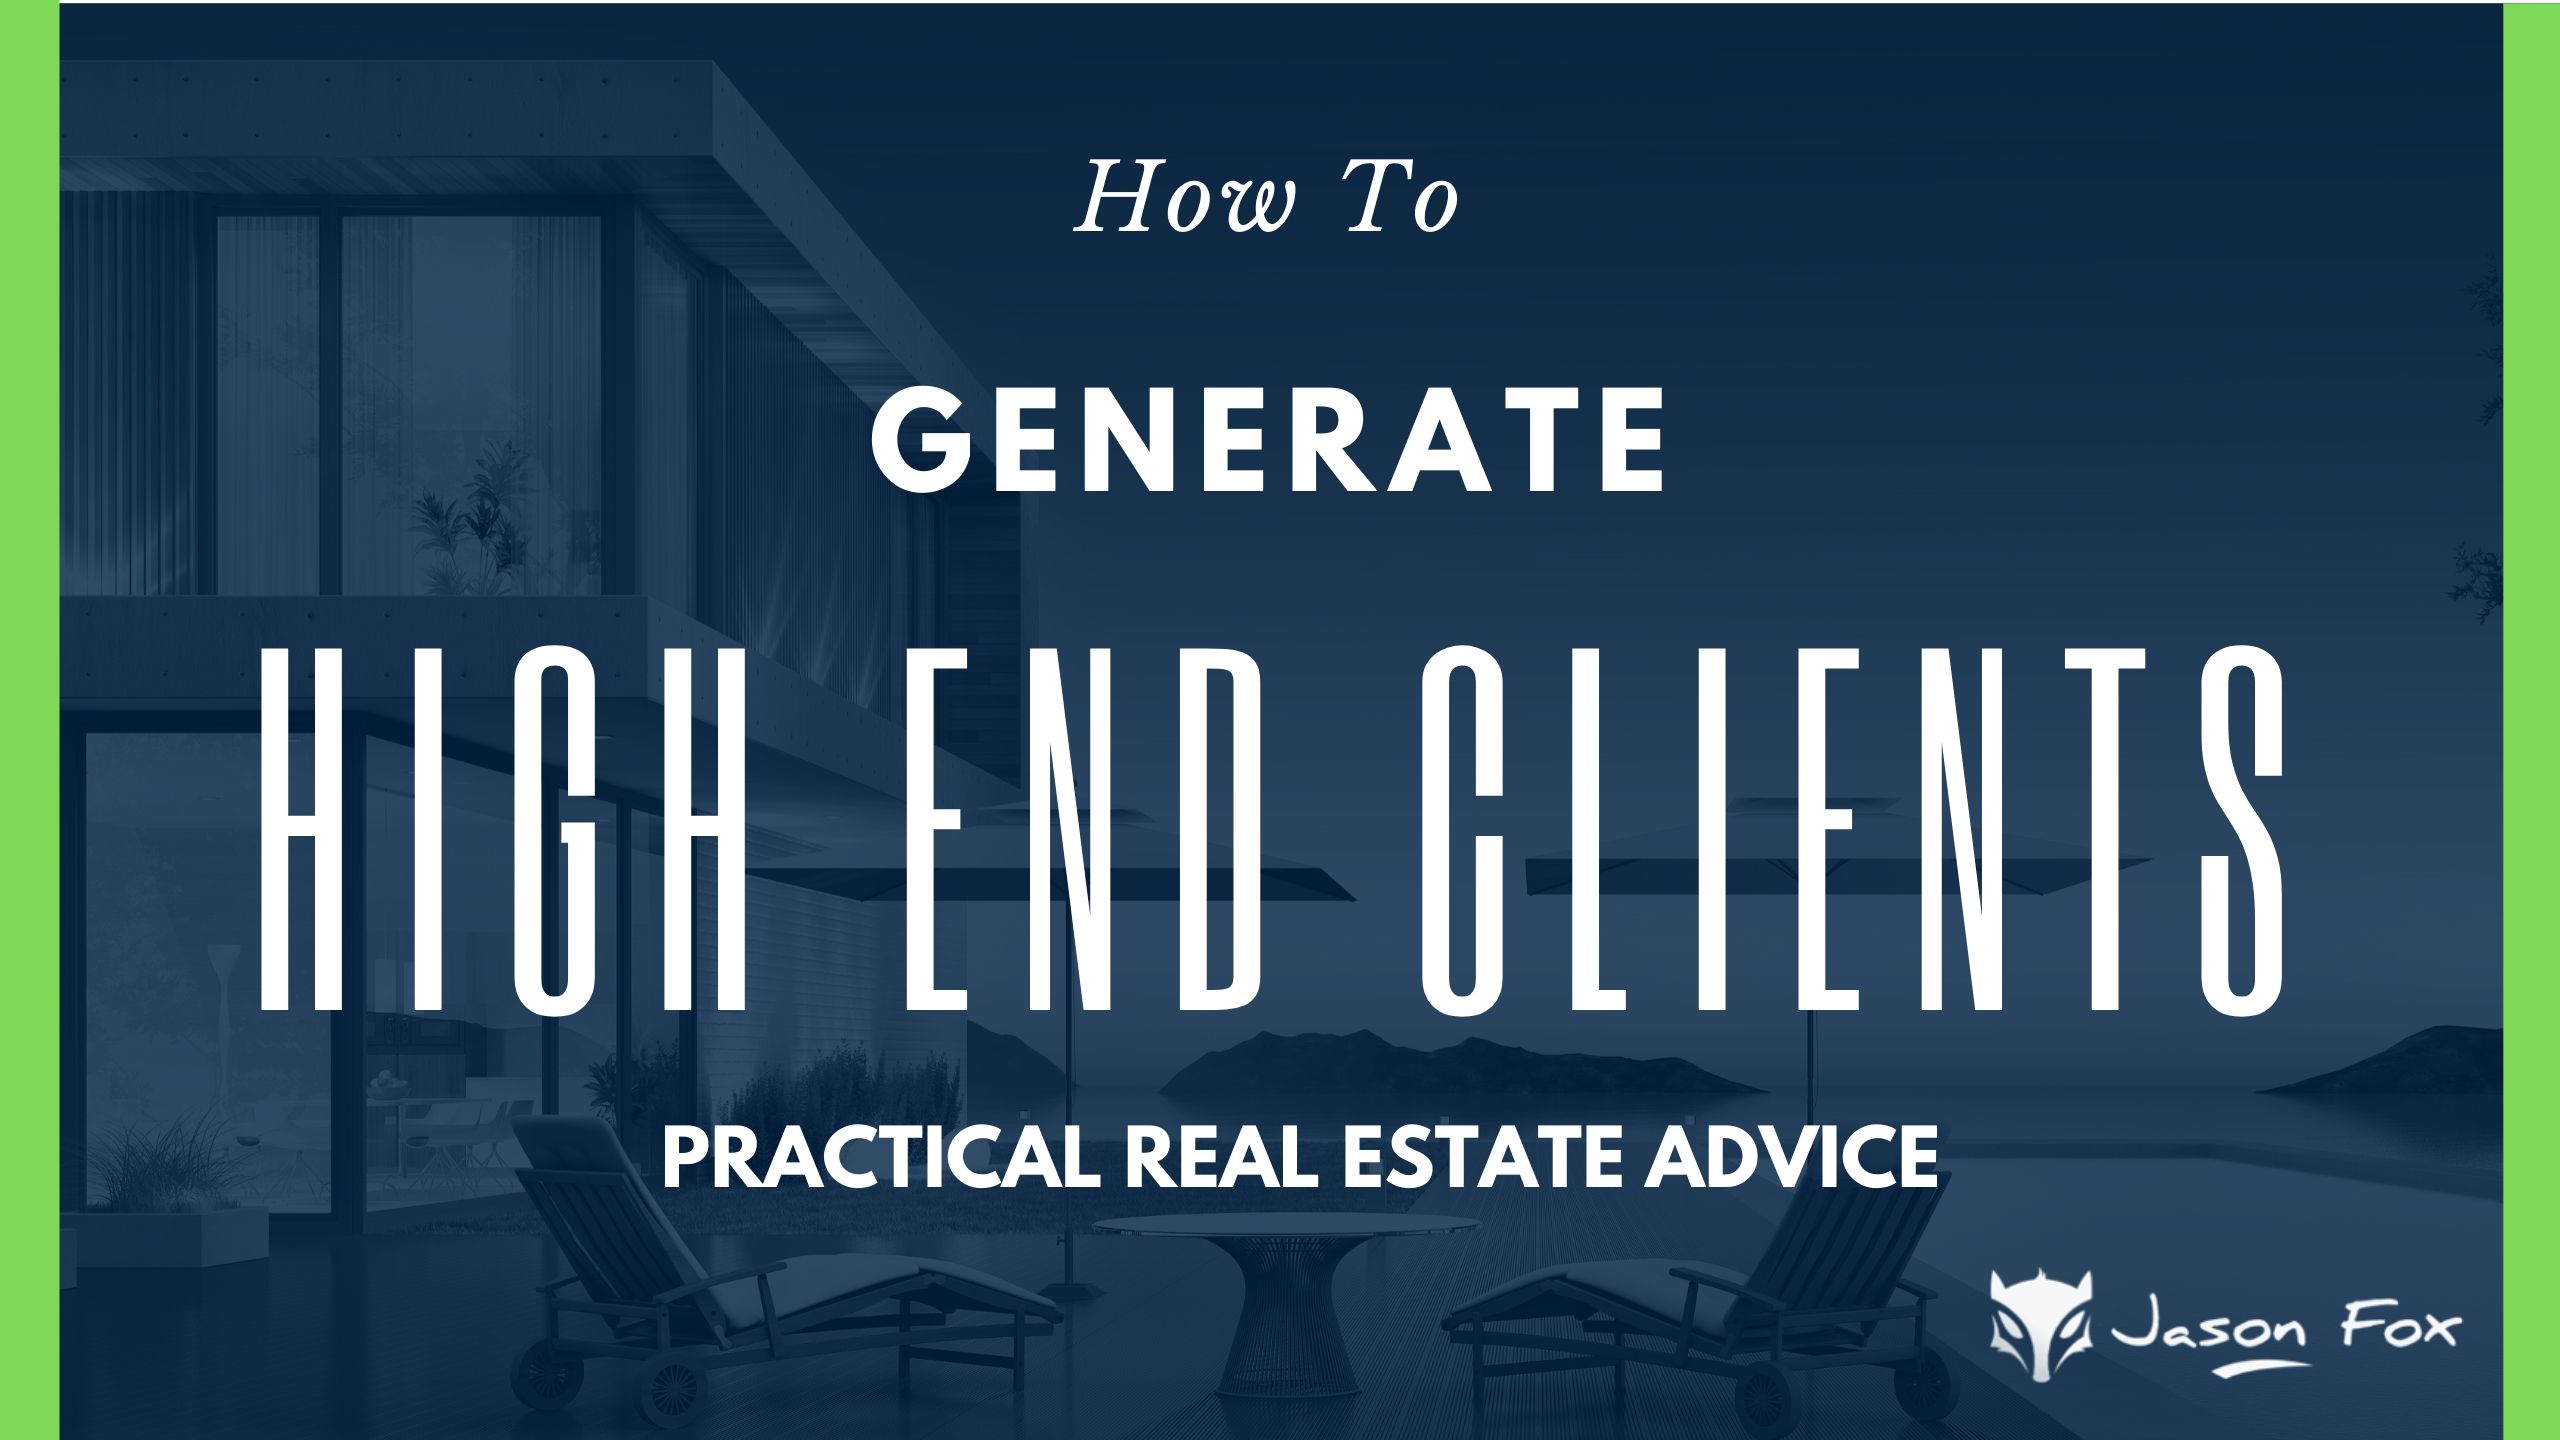 How to generate high end clients practical real estate advice